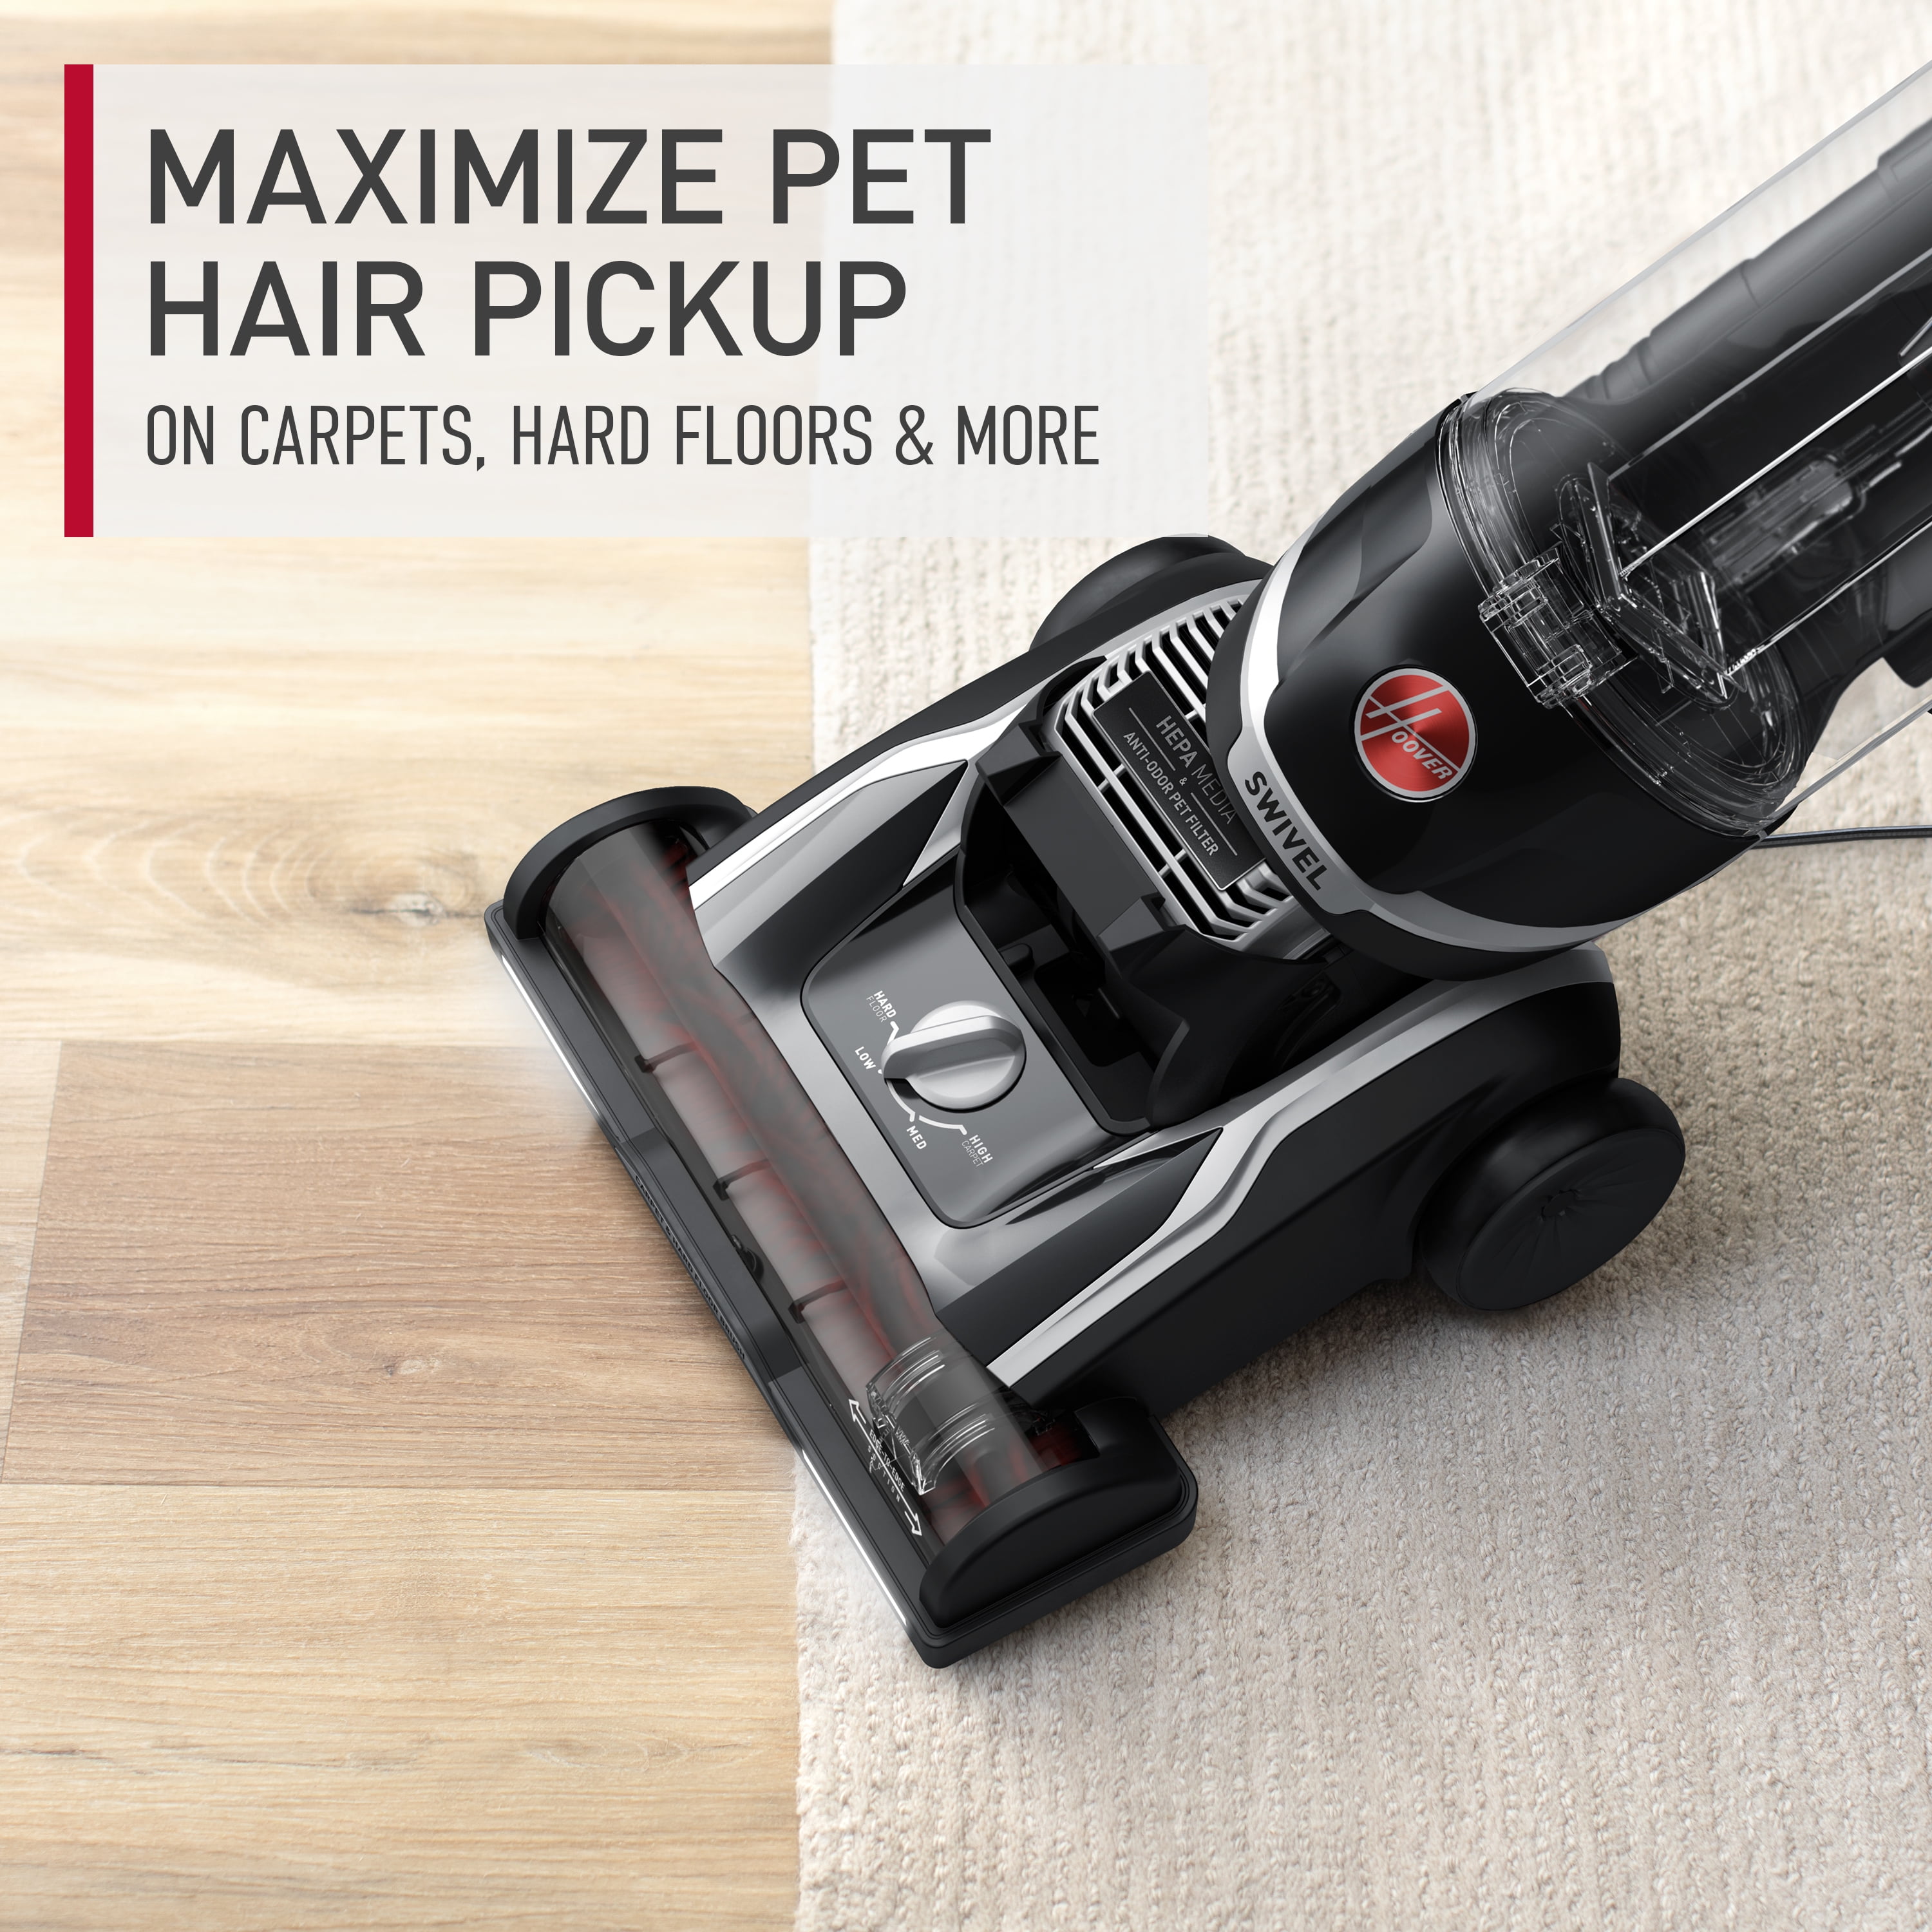 Hoover MAXLife Power Drive Swivel XL Pet Bagless Upright Vacuum Cleaner with HEPA Media Filtration, UH75210 - 3